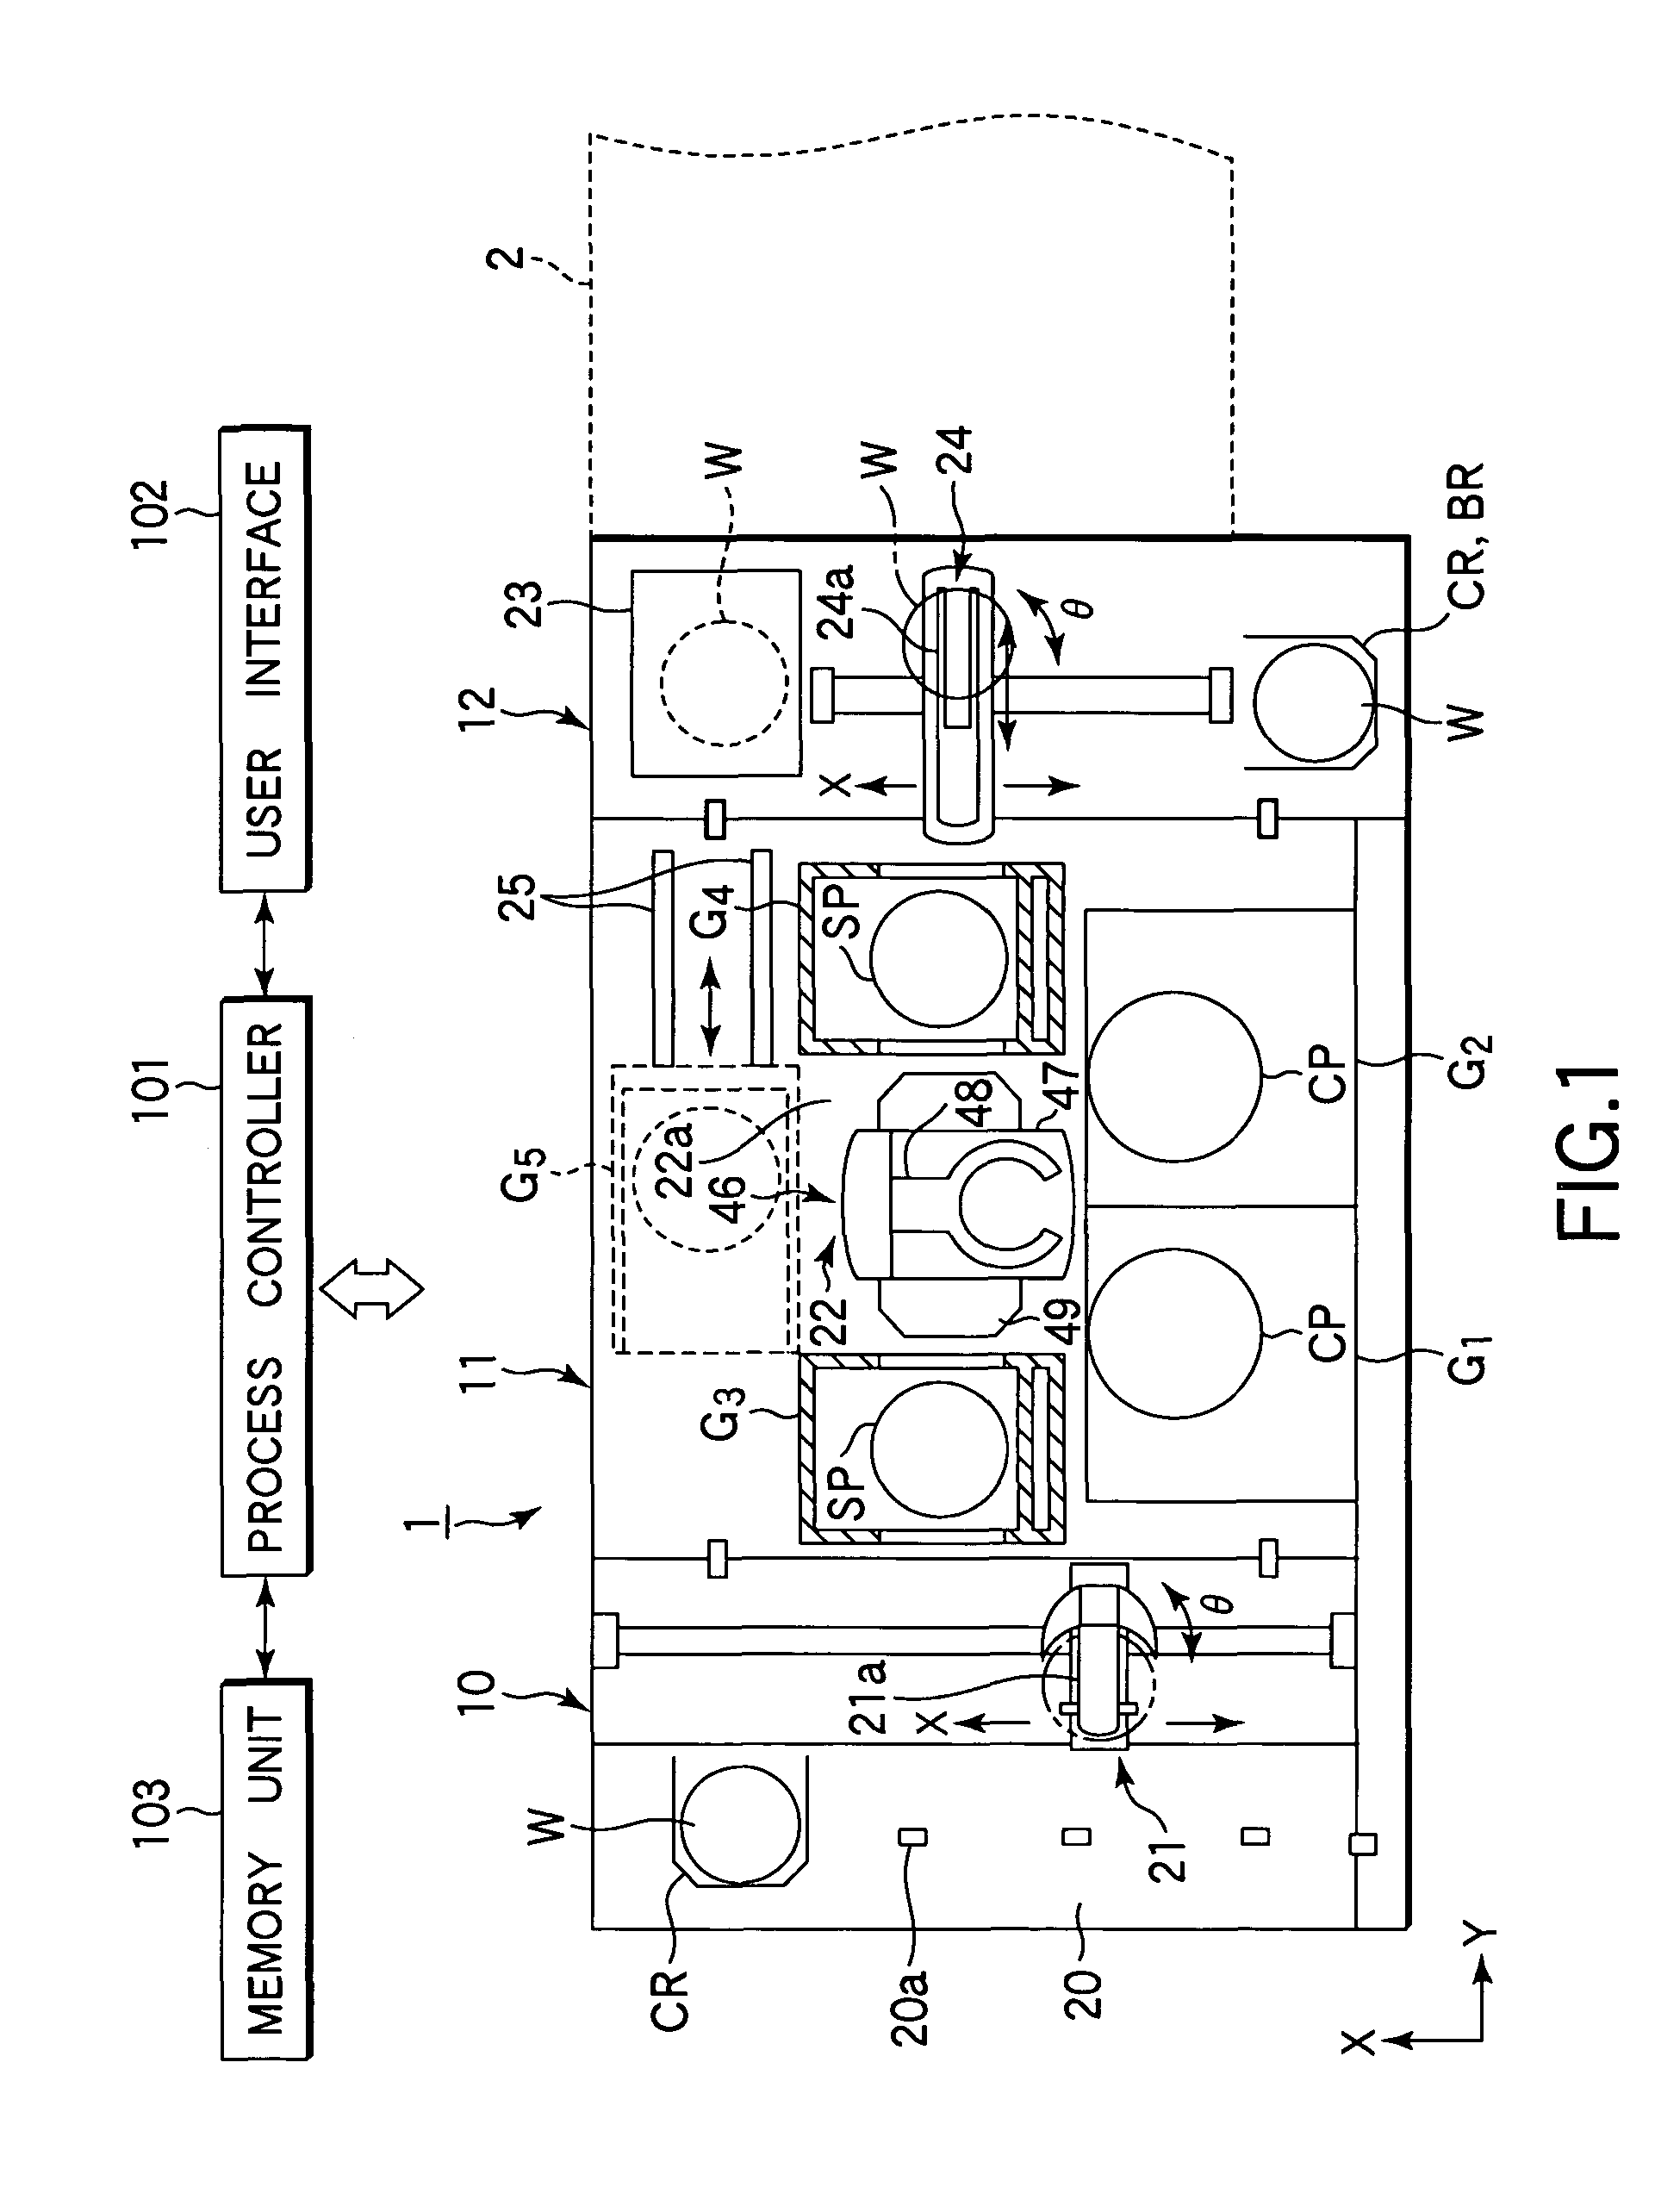 Rinse method and developing apparatus